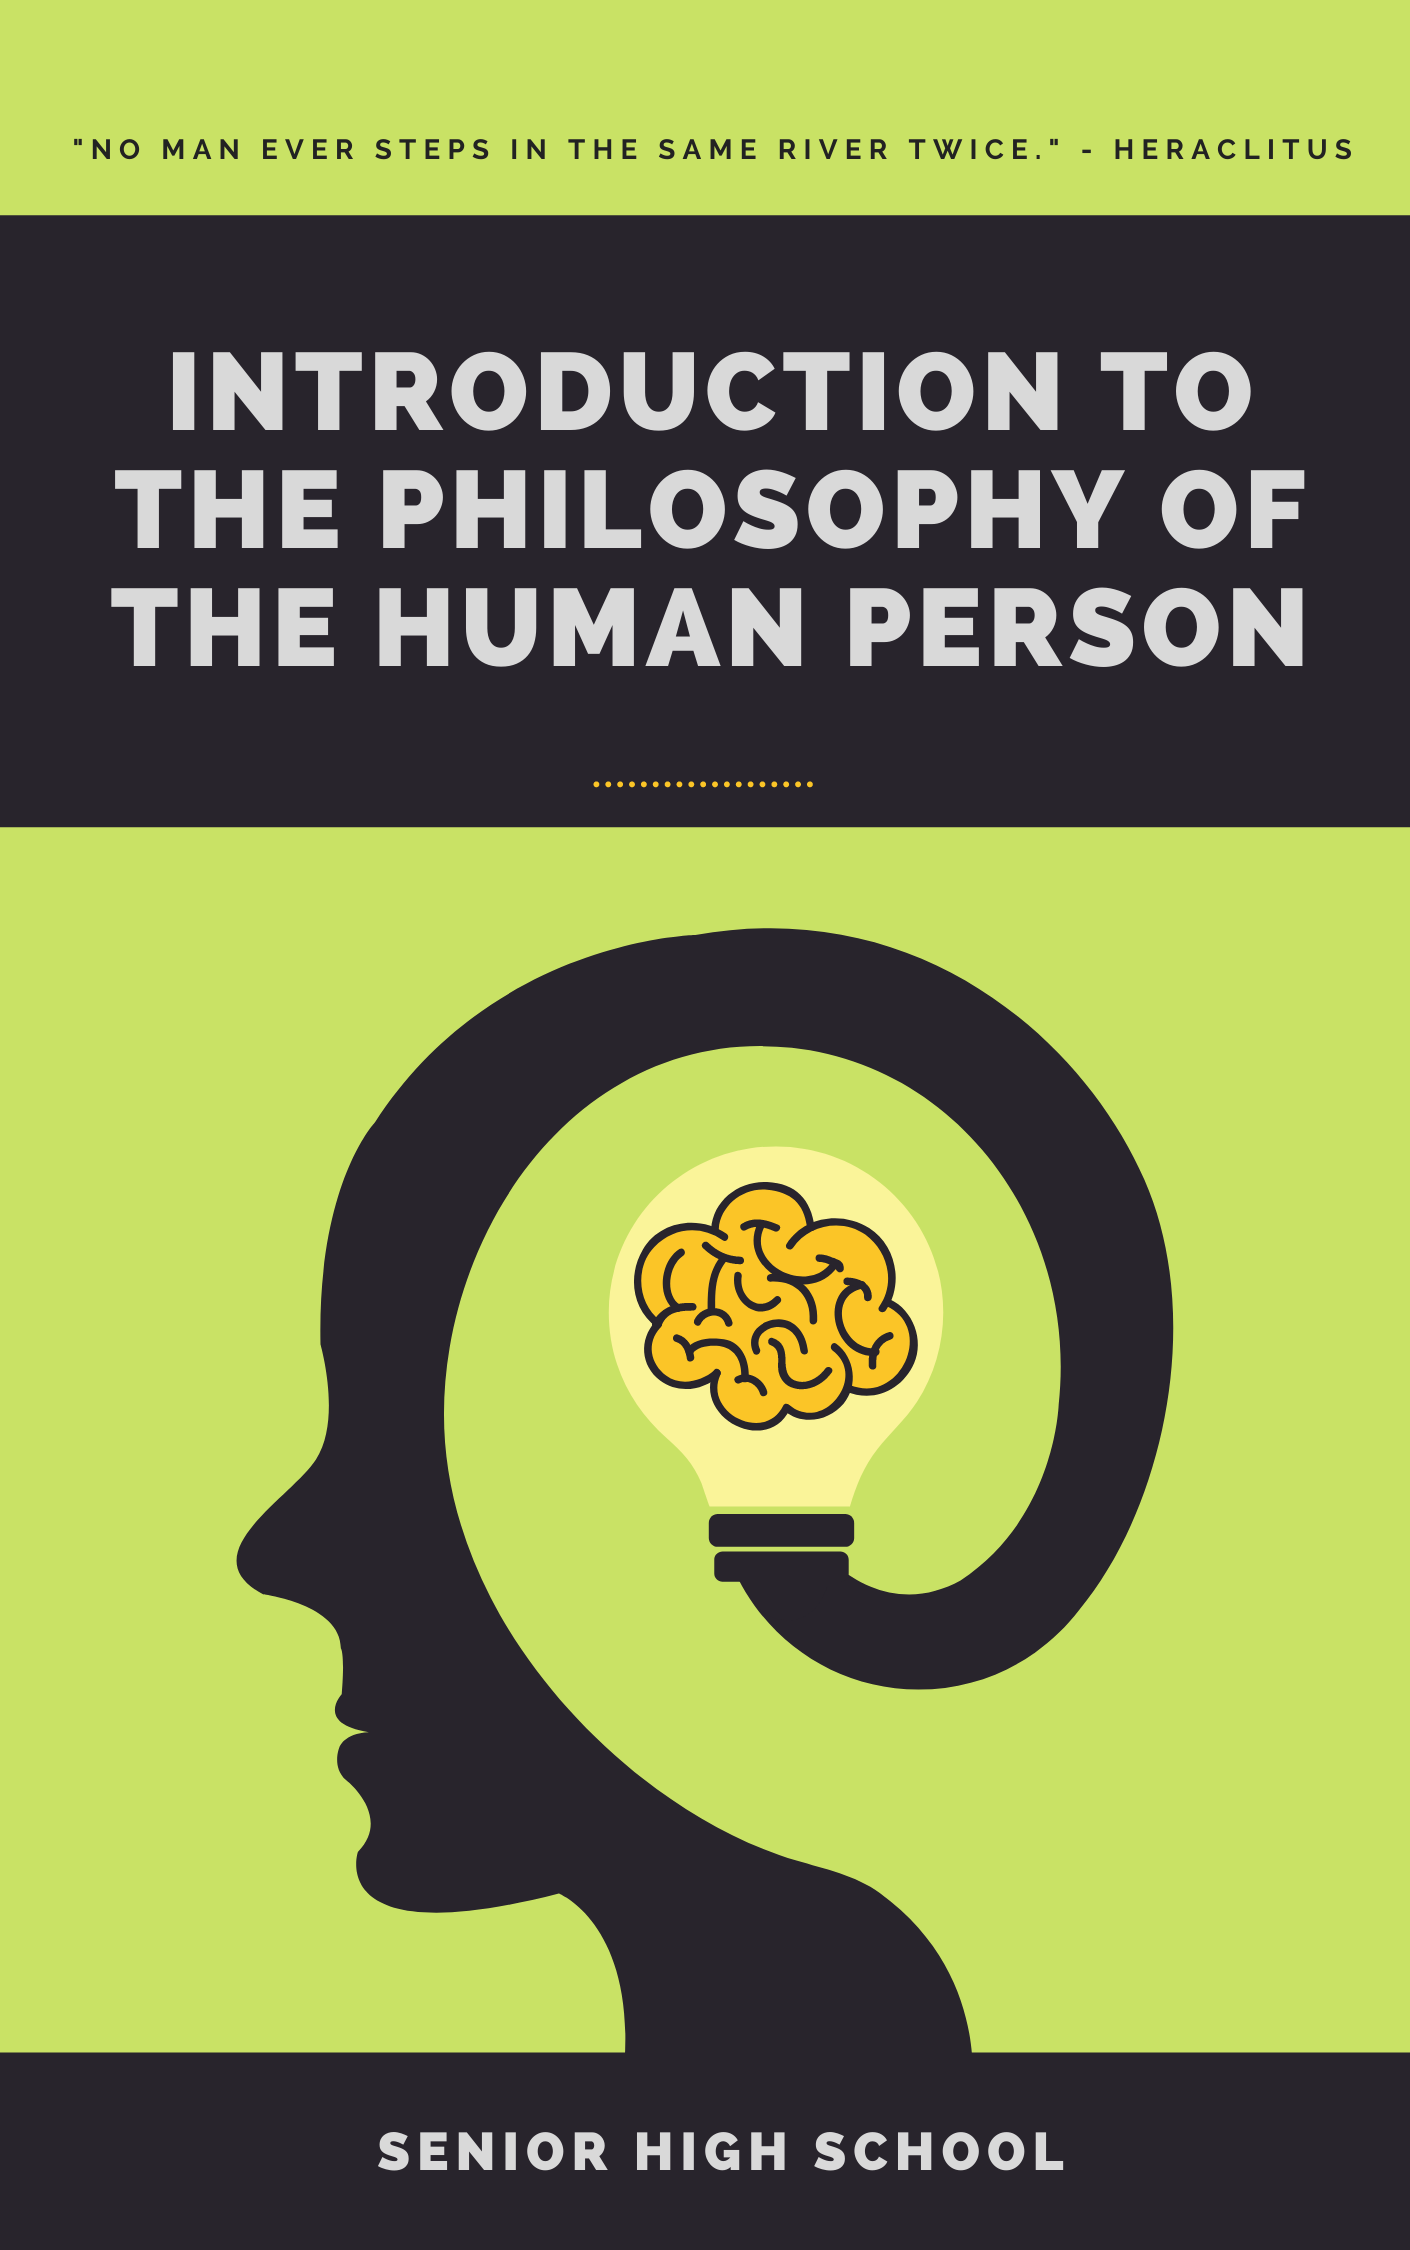 Introduction to the Philosophy of the Human Person - Grade 11